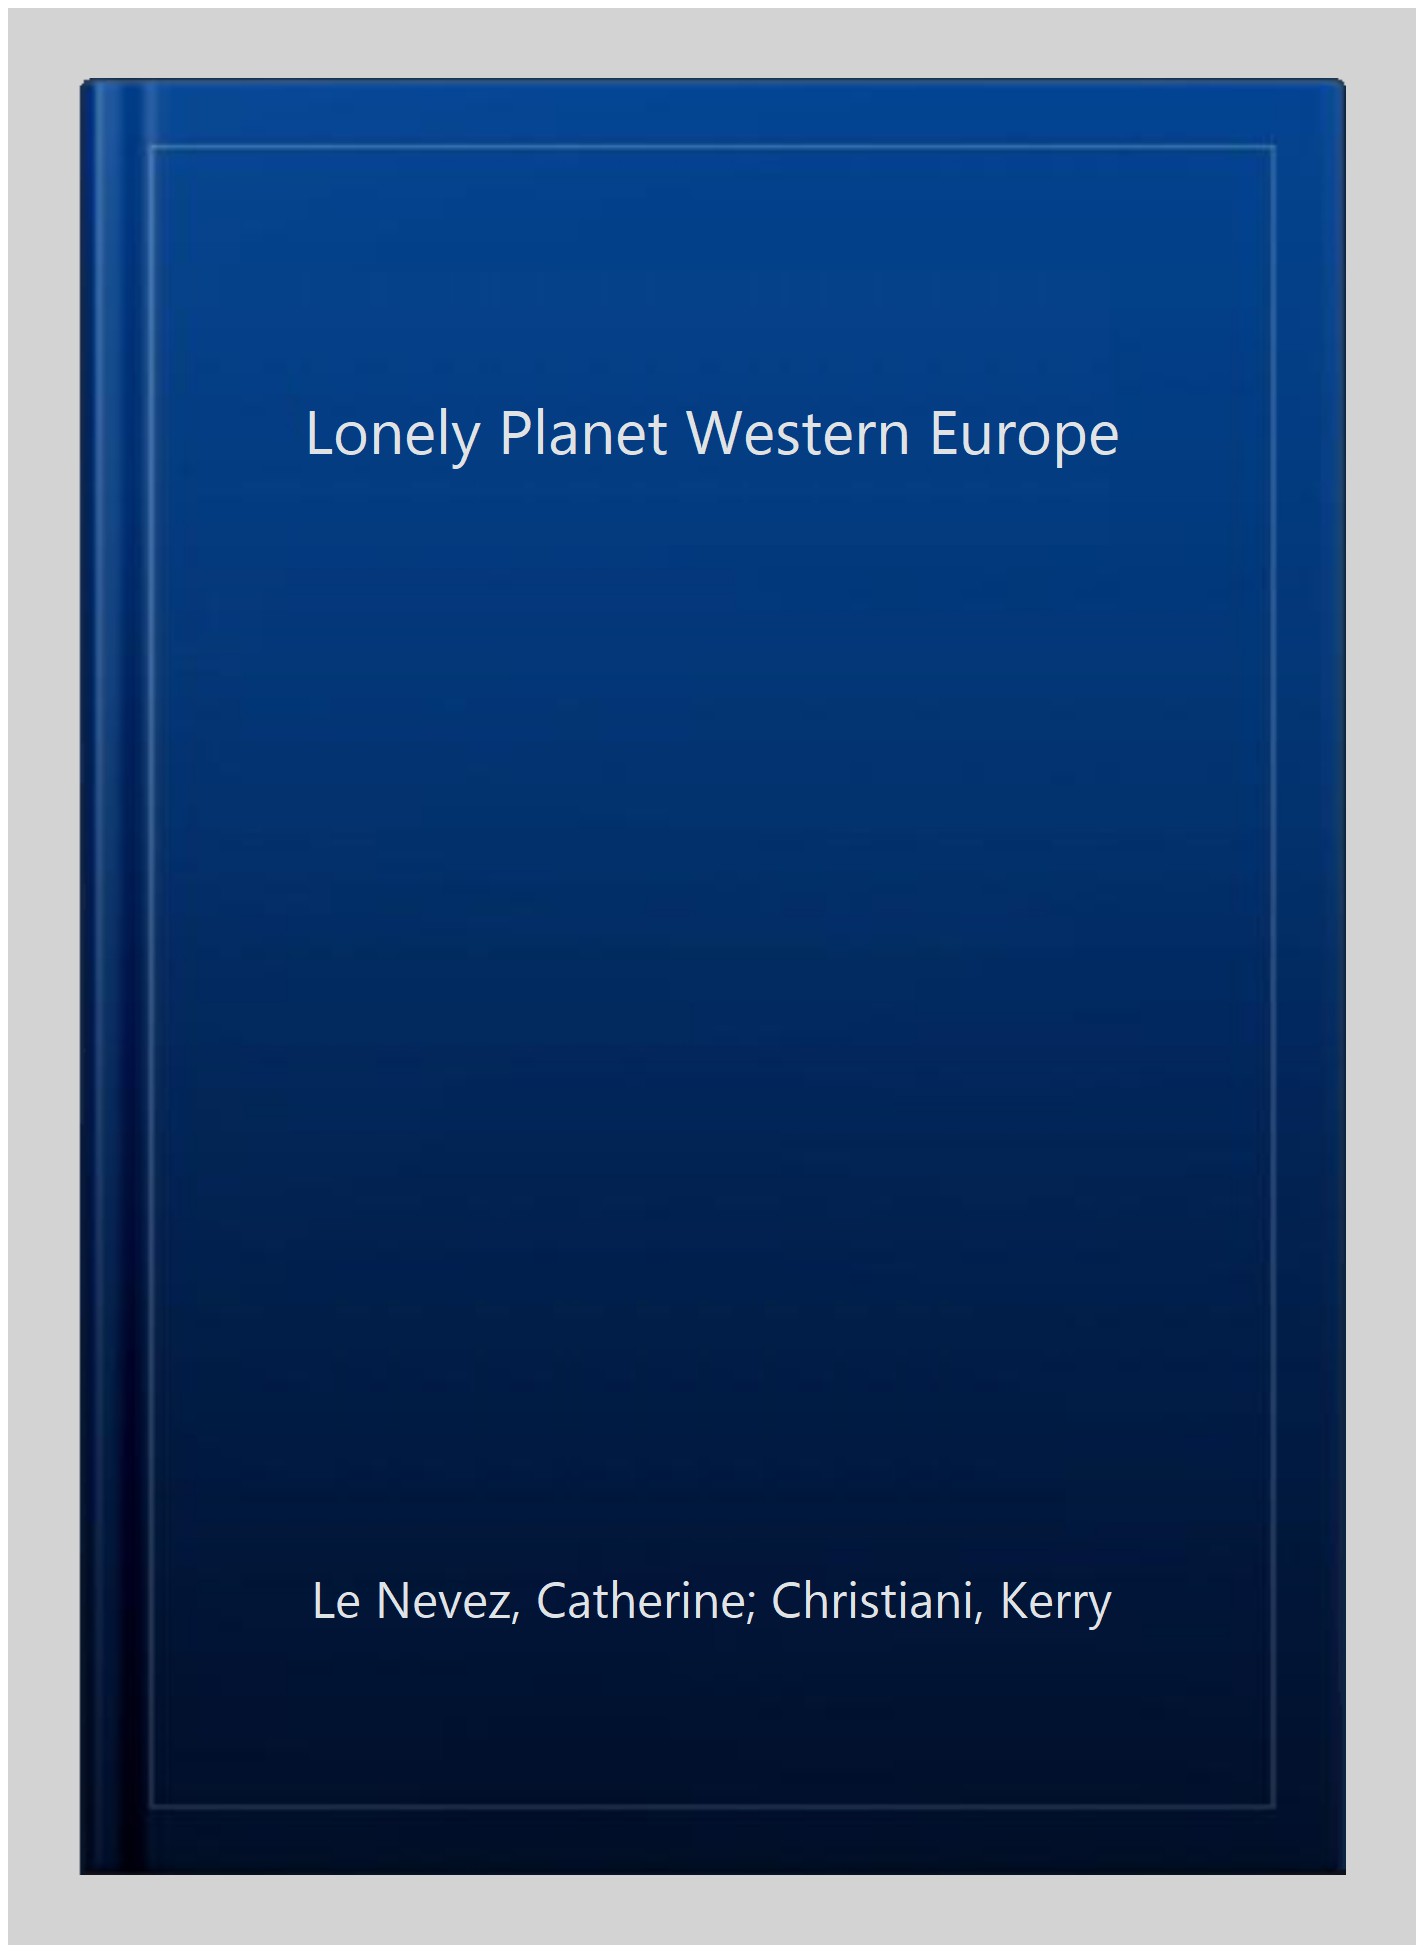 Elliott,　1787013723,　Planet　Europe,　Mark;　Le　Western　ISBN　Nevez,　Garwood,　Kerry;　by　Paperback　Christiani,　Catherine;　Duncan,　Pre-owned:　Gregor;　ISBN-13　Lonely　Clark,　9781787013728